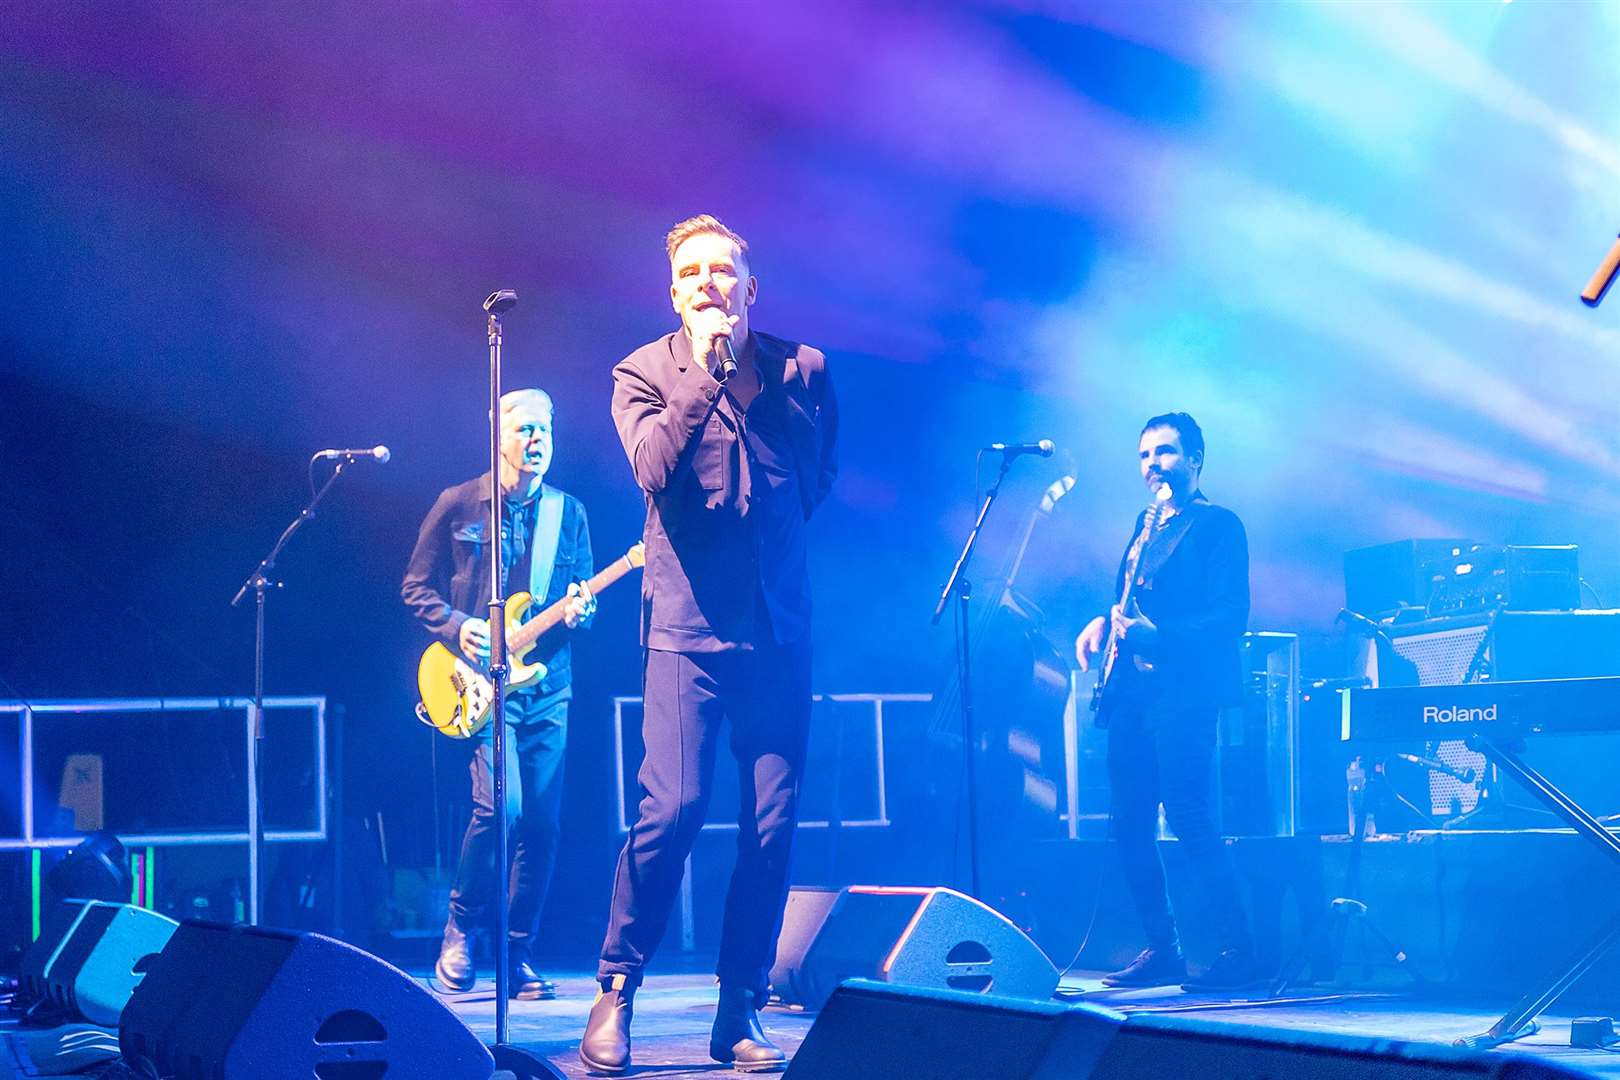 Deacon Blue at Inverness Leisure. Pic: Eoghan Smith